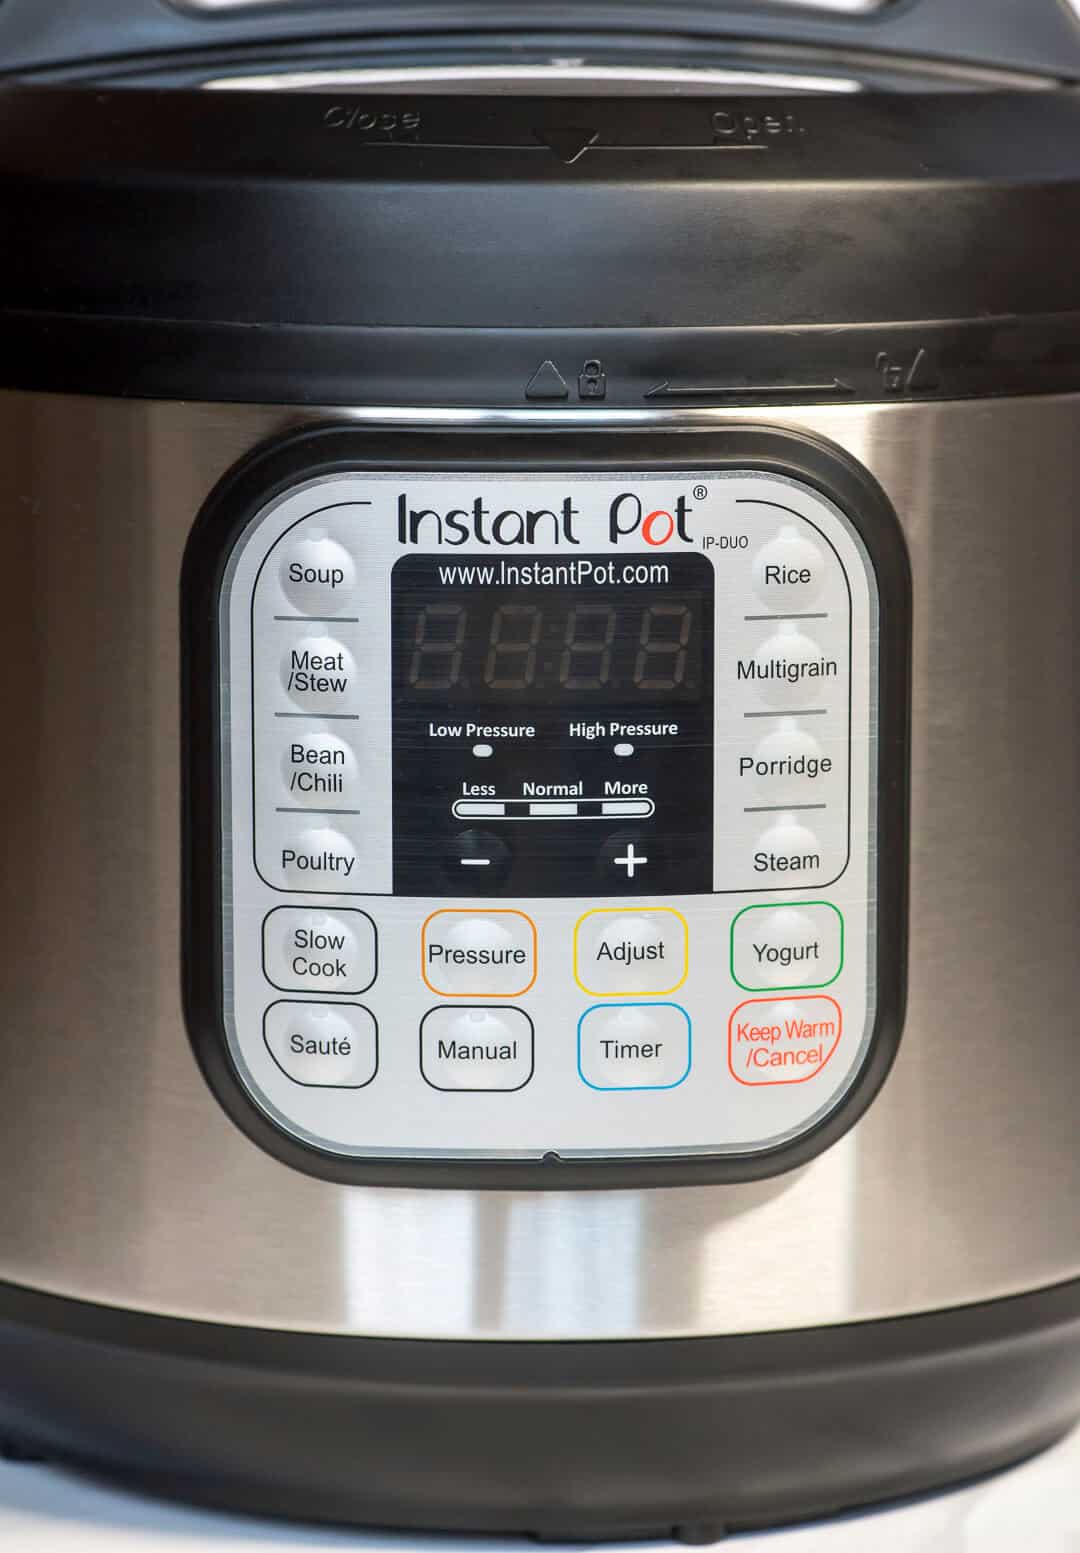 A close up image of the controls on the front of the Instant Pot.